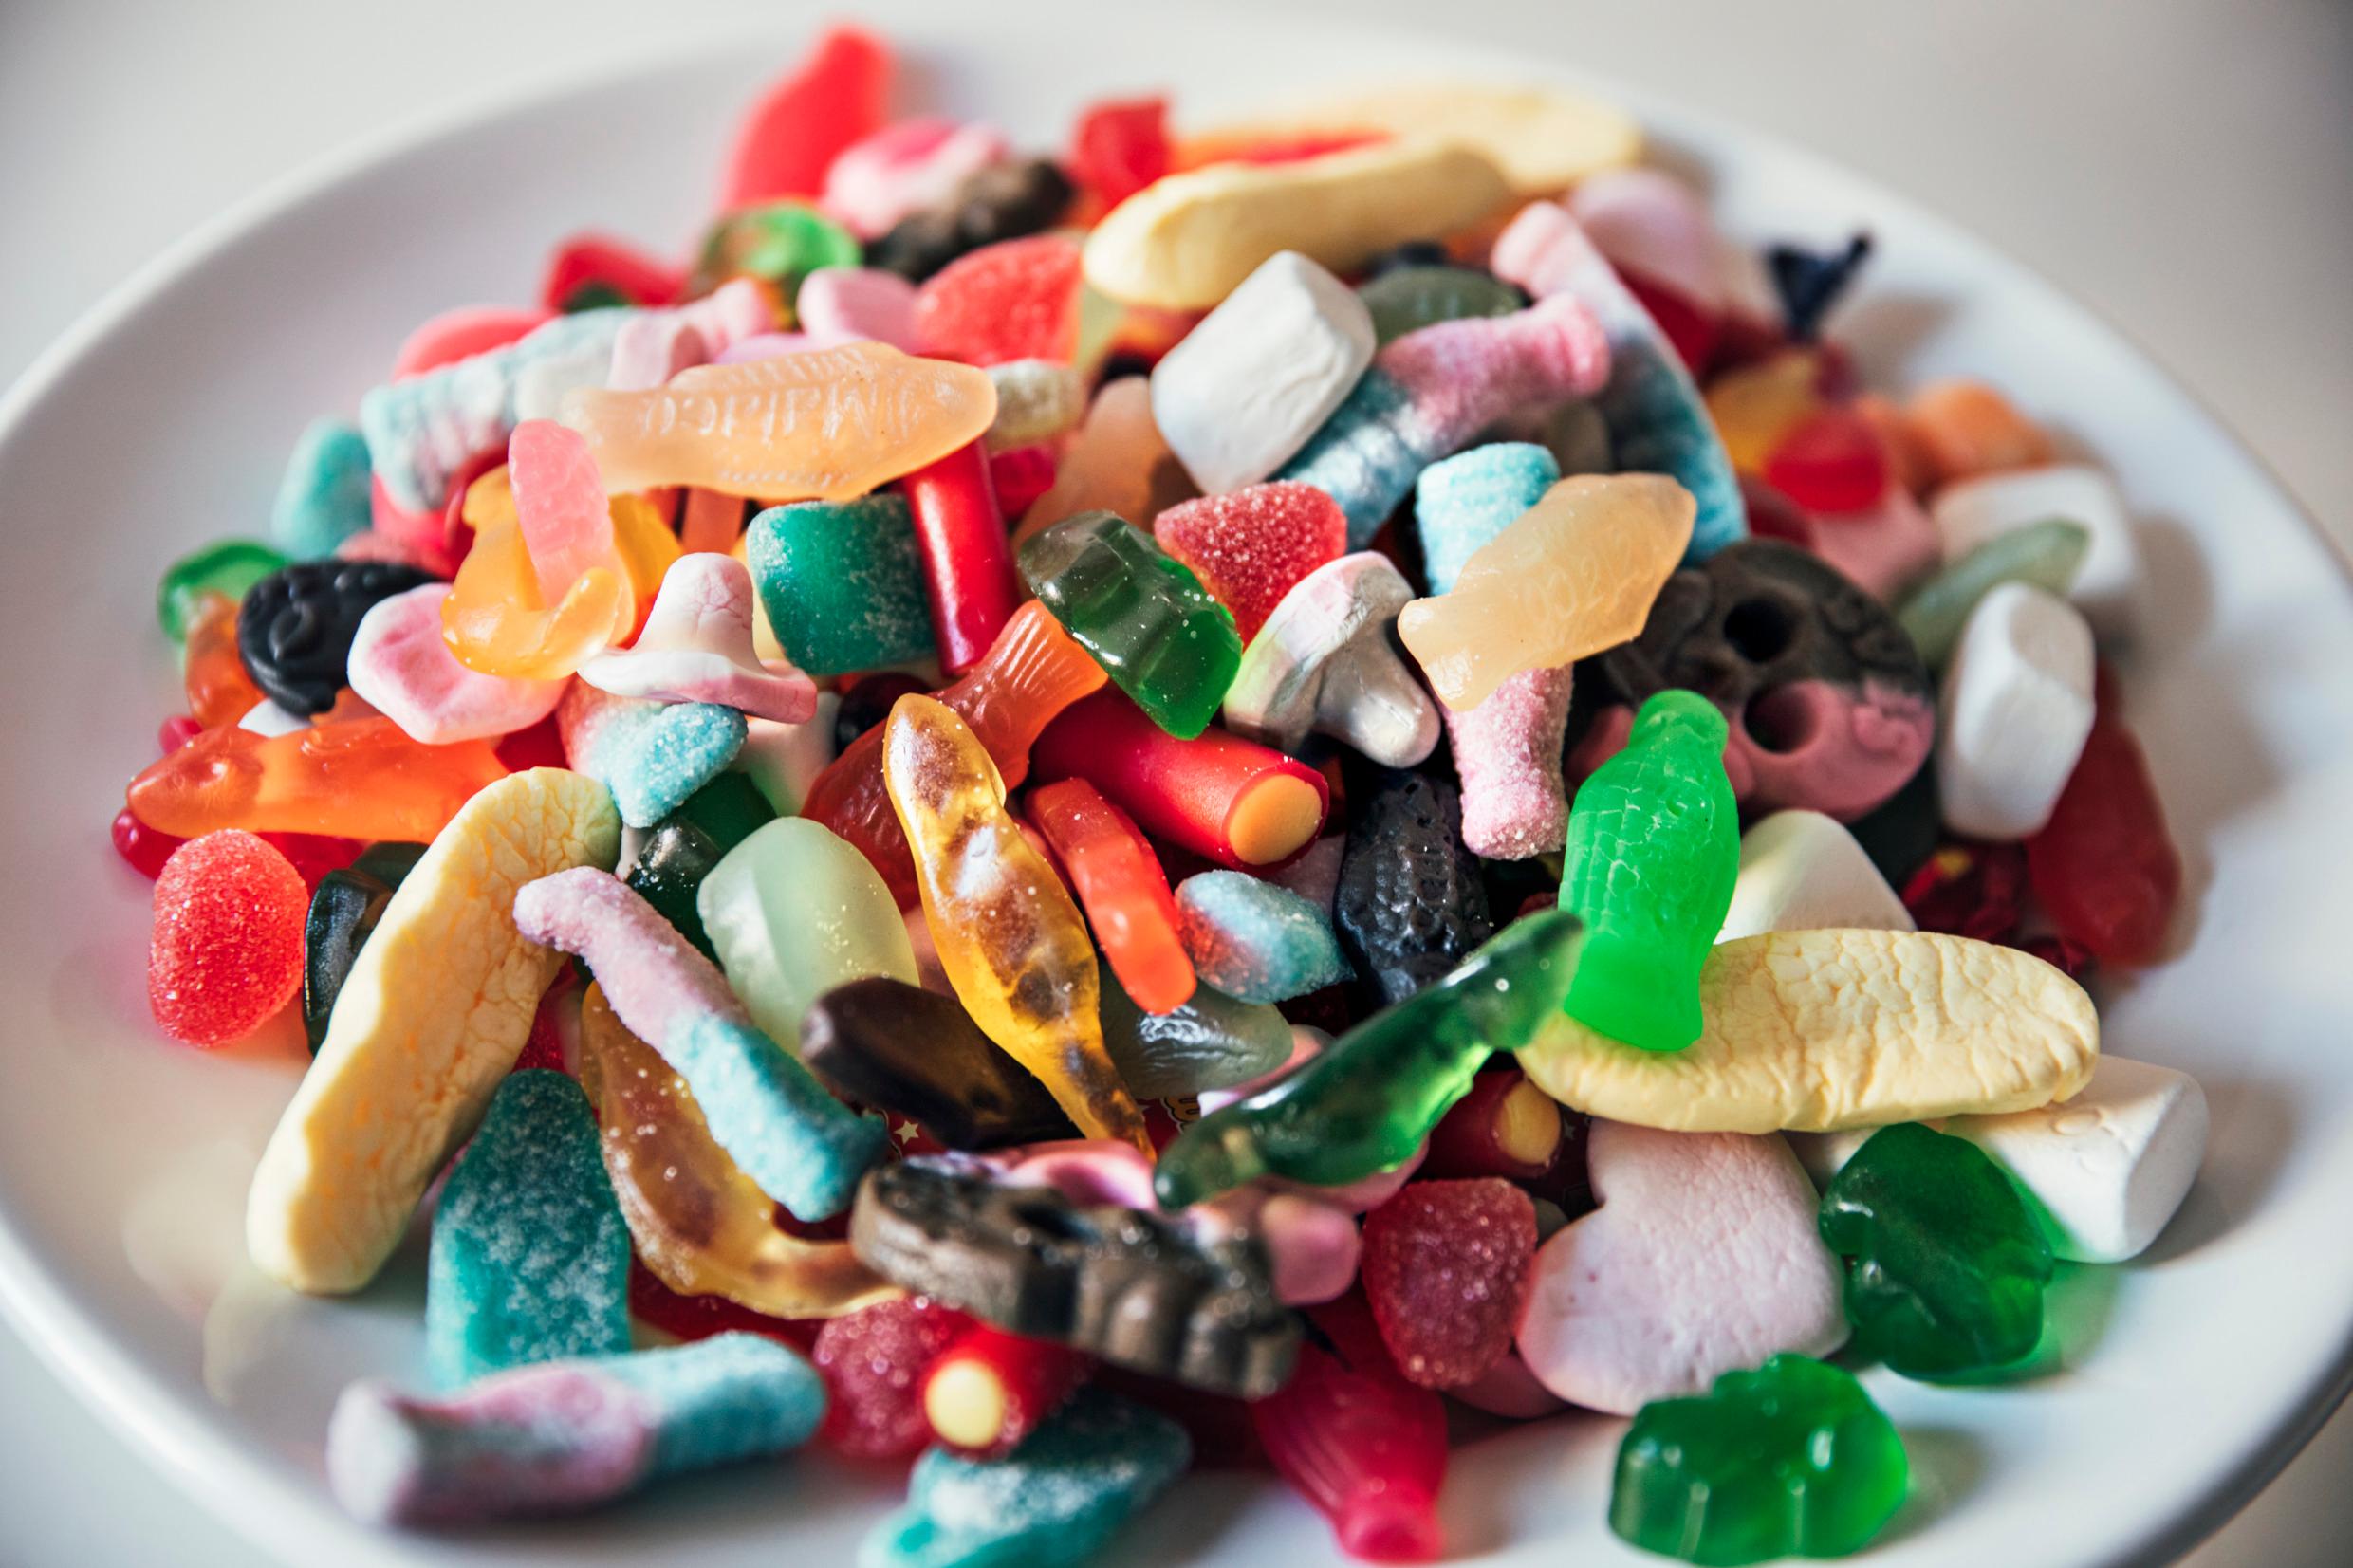 A big pile of pick-and-mix sweets on a plate.